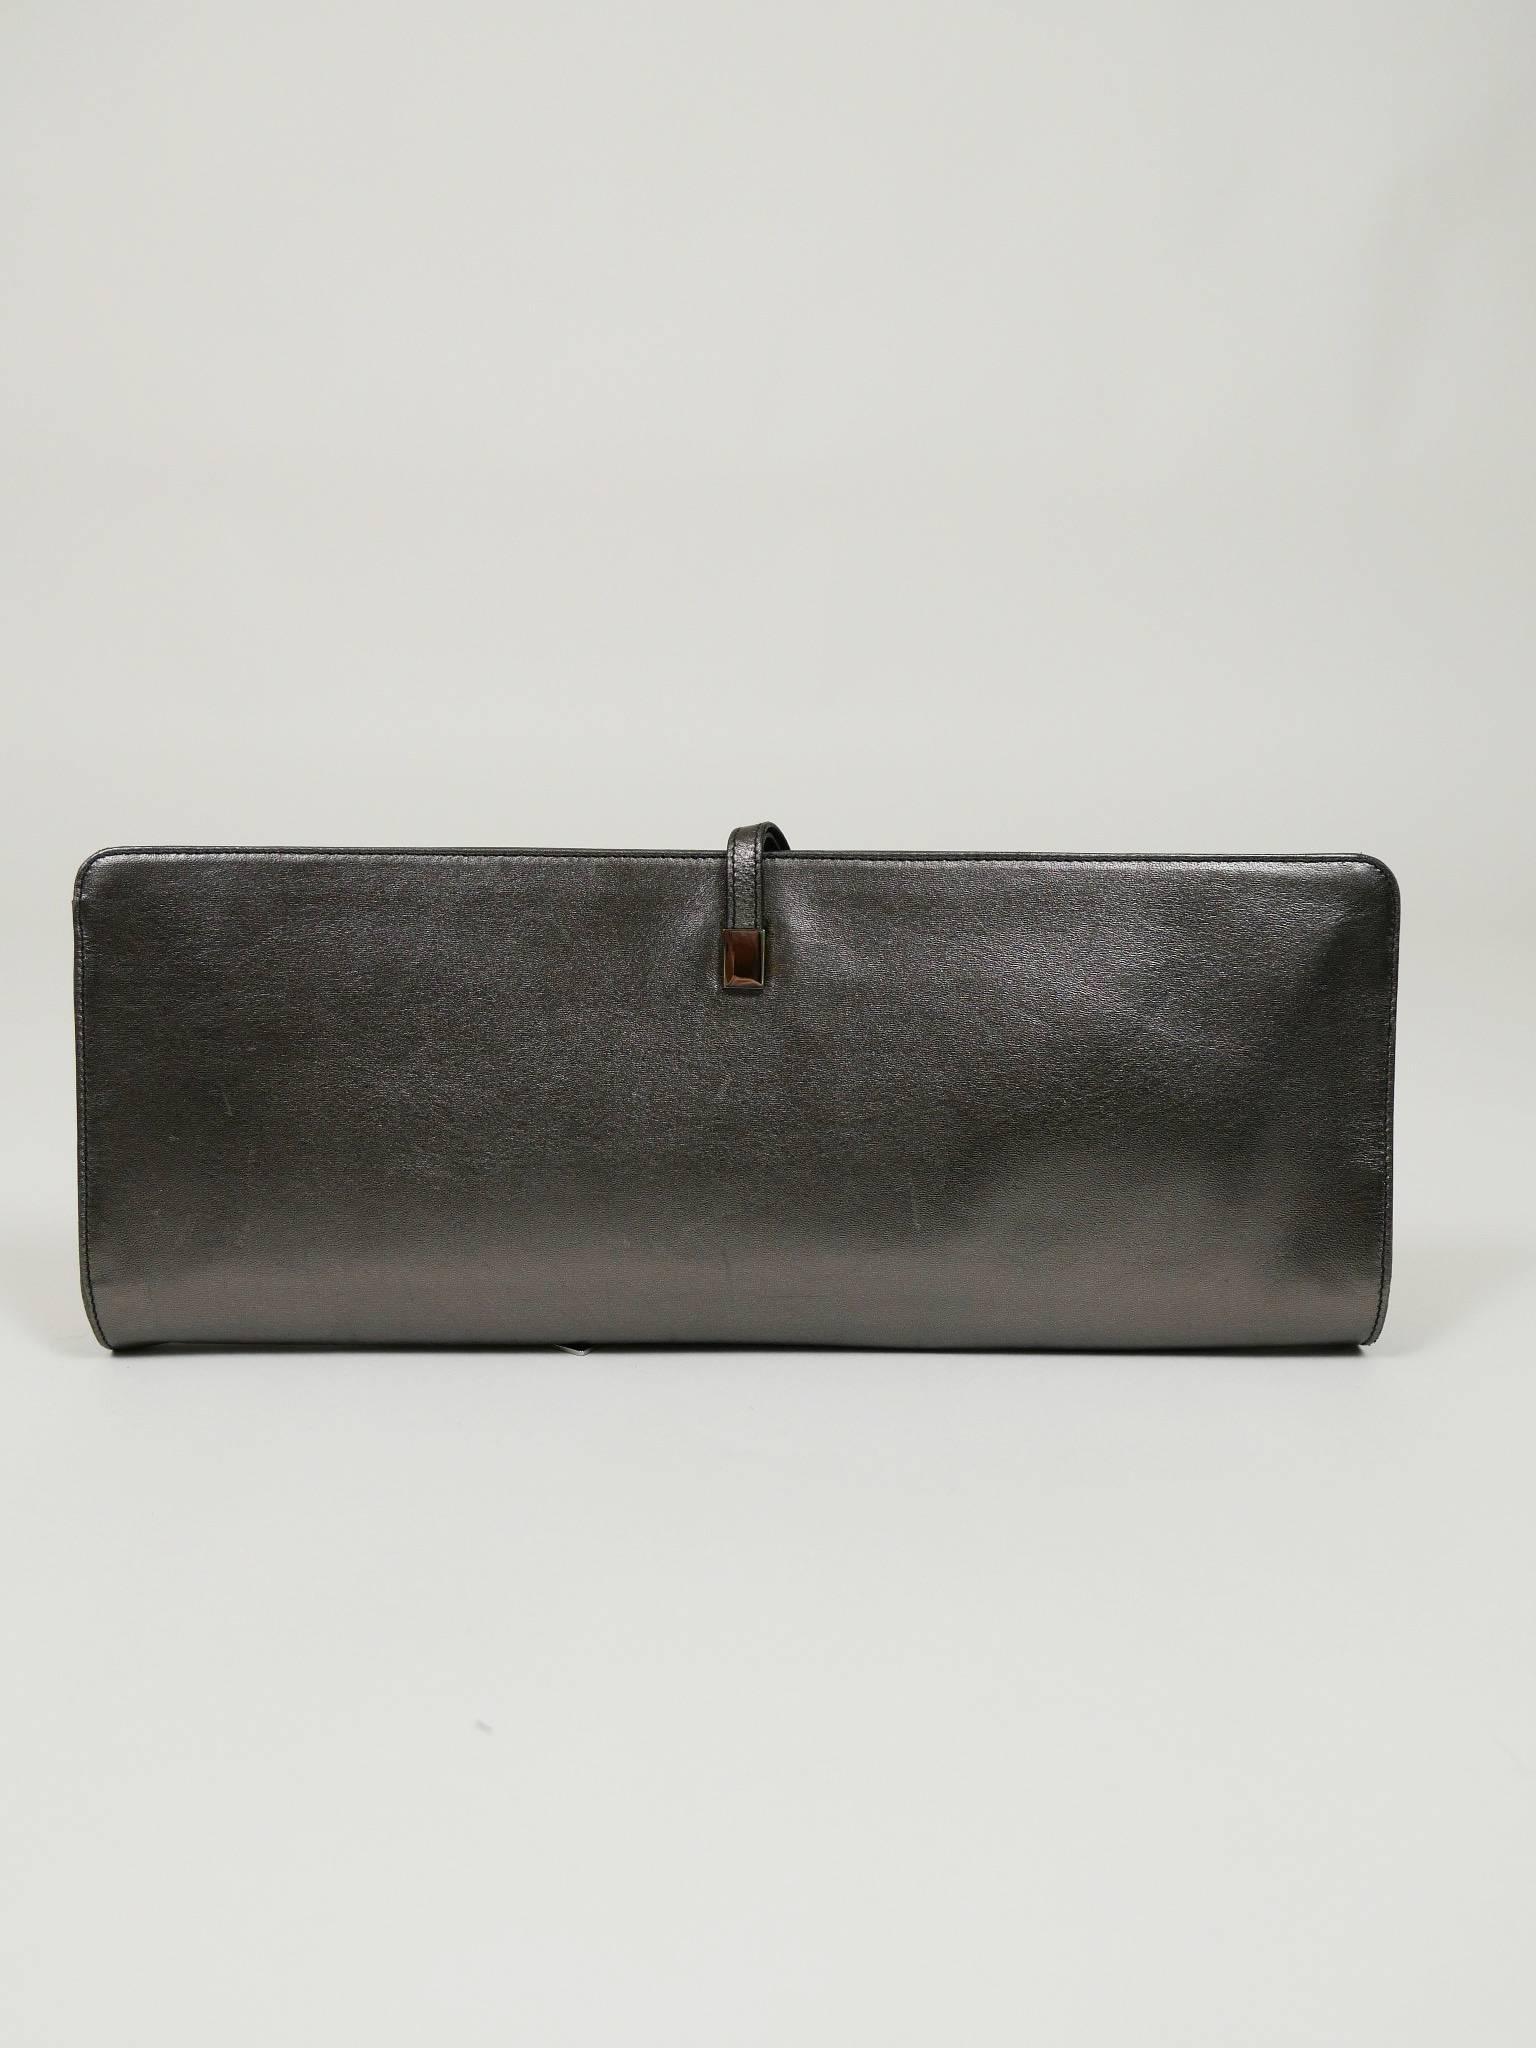 This glamourous authentic Yves Saint Laurent clutch purse is in a metallic dark gray leather. It has wrap around strap, original brand inside, multiple pockets and automatic button closure and signed satin fabric lined. It's perfect for any